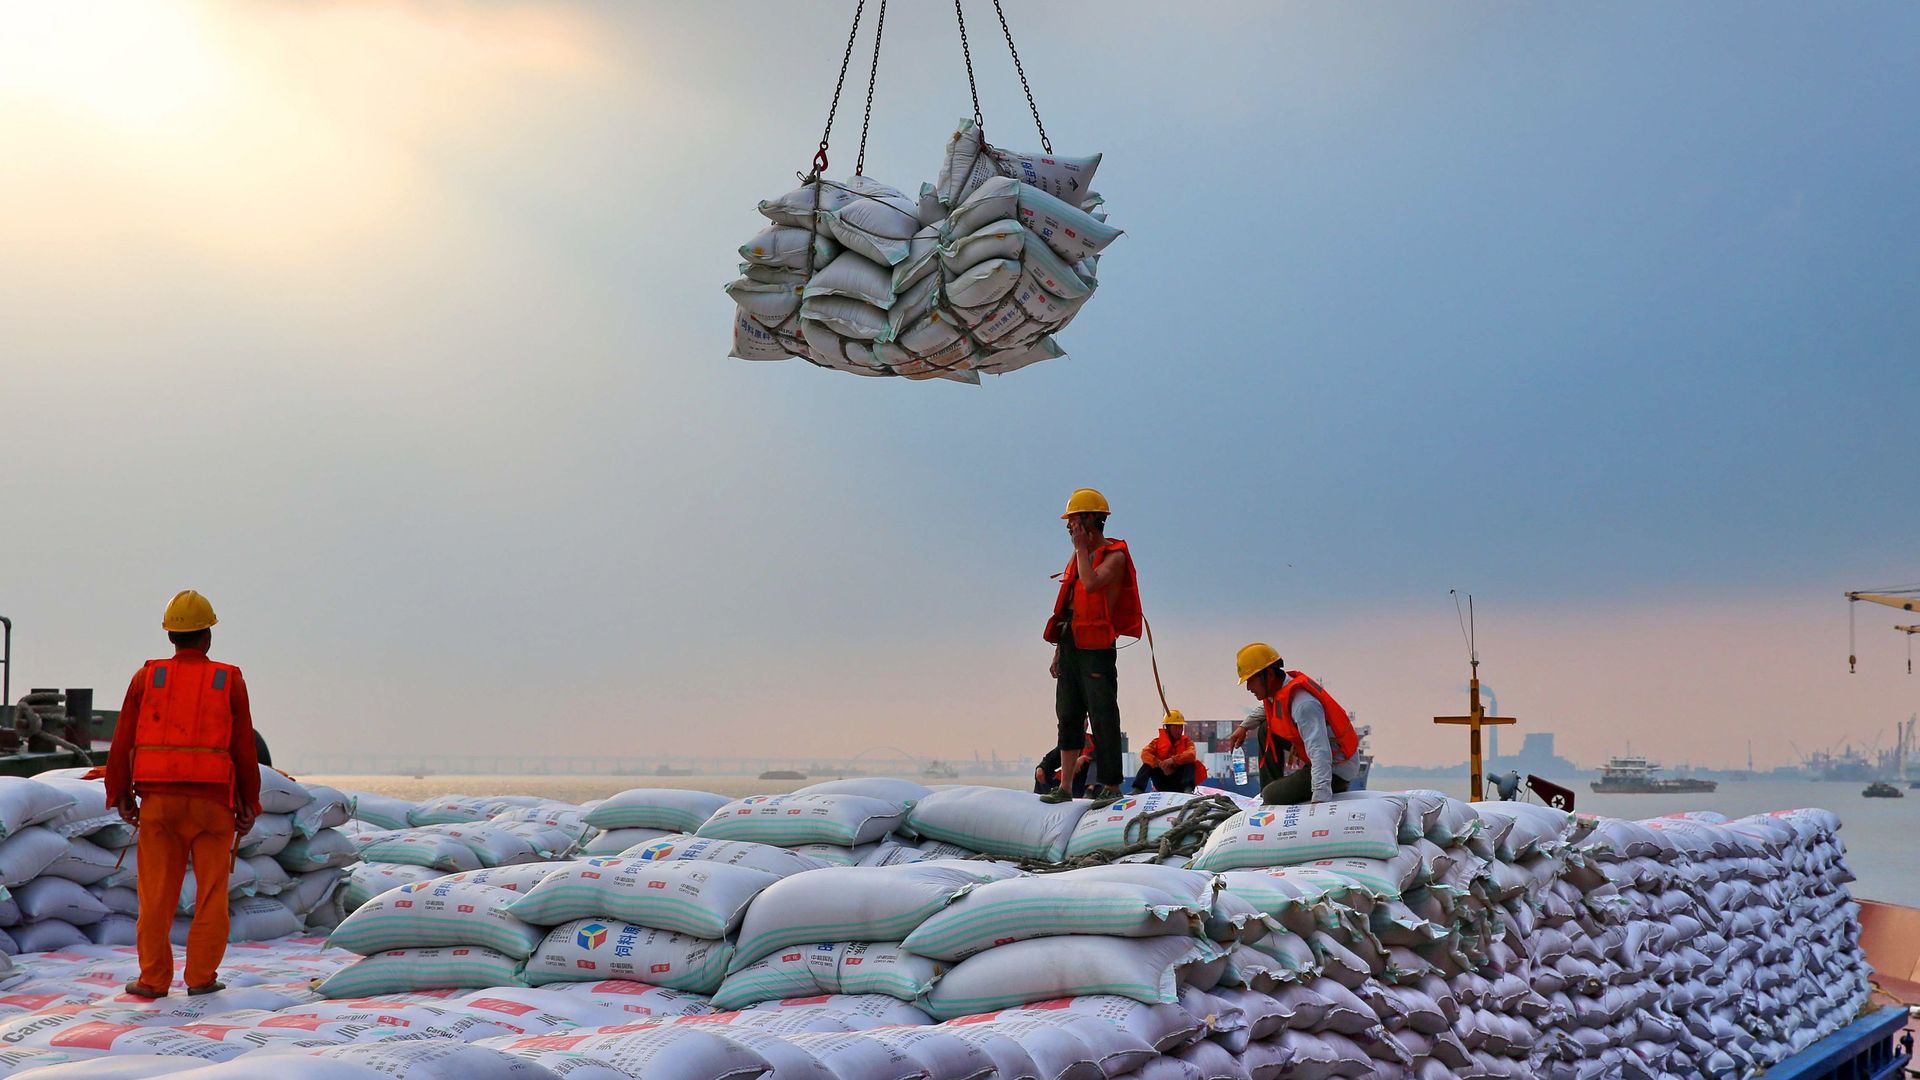 Workers unloading bags of soybeans at a port in China